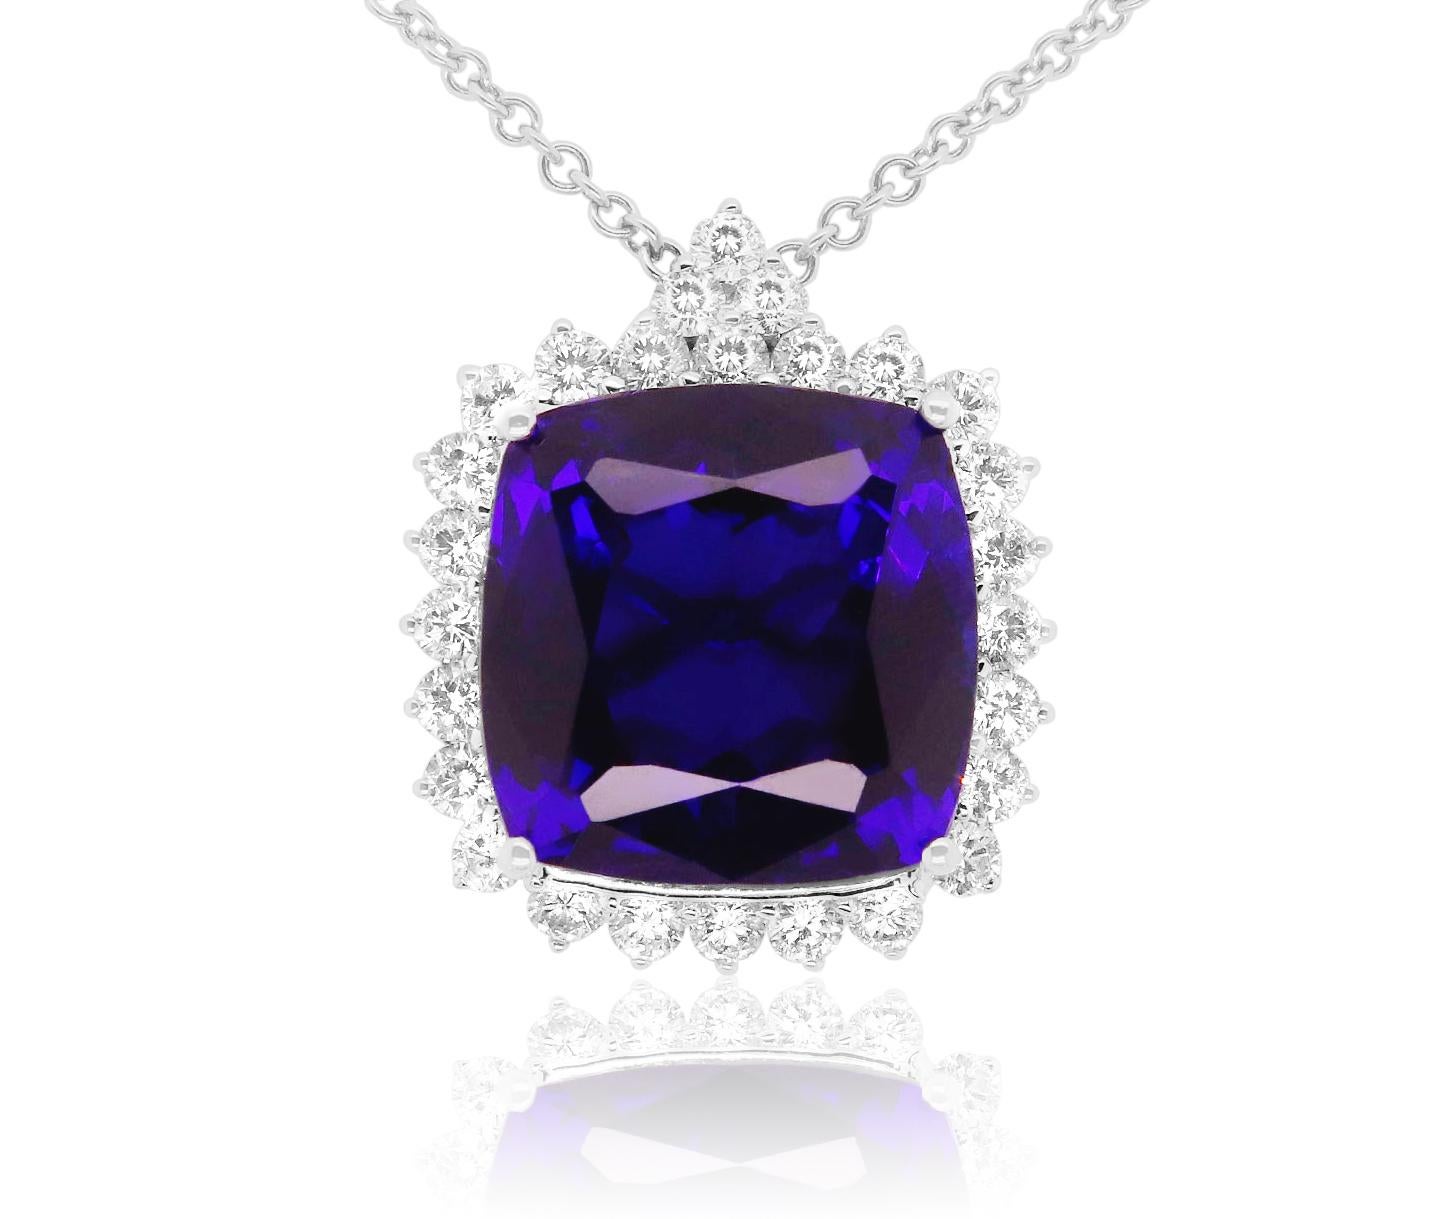 18k White Gold
Center Stone: 1 Cushion Cut Tanzanite at 23.70 Carats- Measuring 16.7 x 16.7 mm
Diamonds: 20 Brilliant White Round Diamonds at 2.46 Carats - Color: HI - Clarity: SI

Fine one-of-a-kind craftsmanship meets incredible quality in this